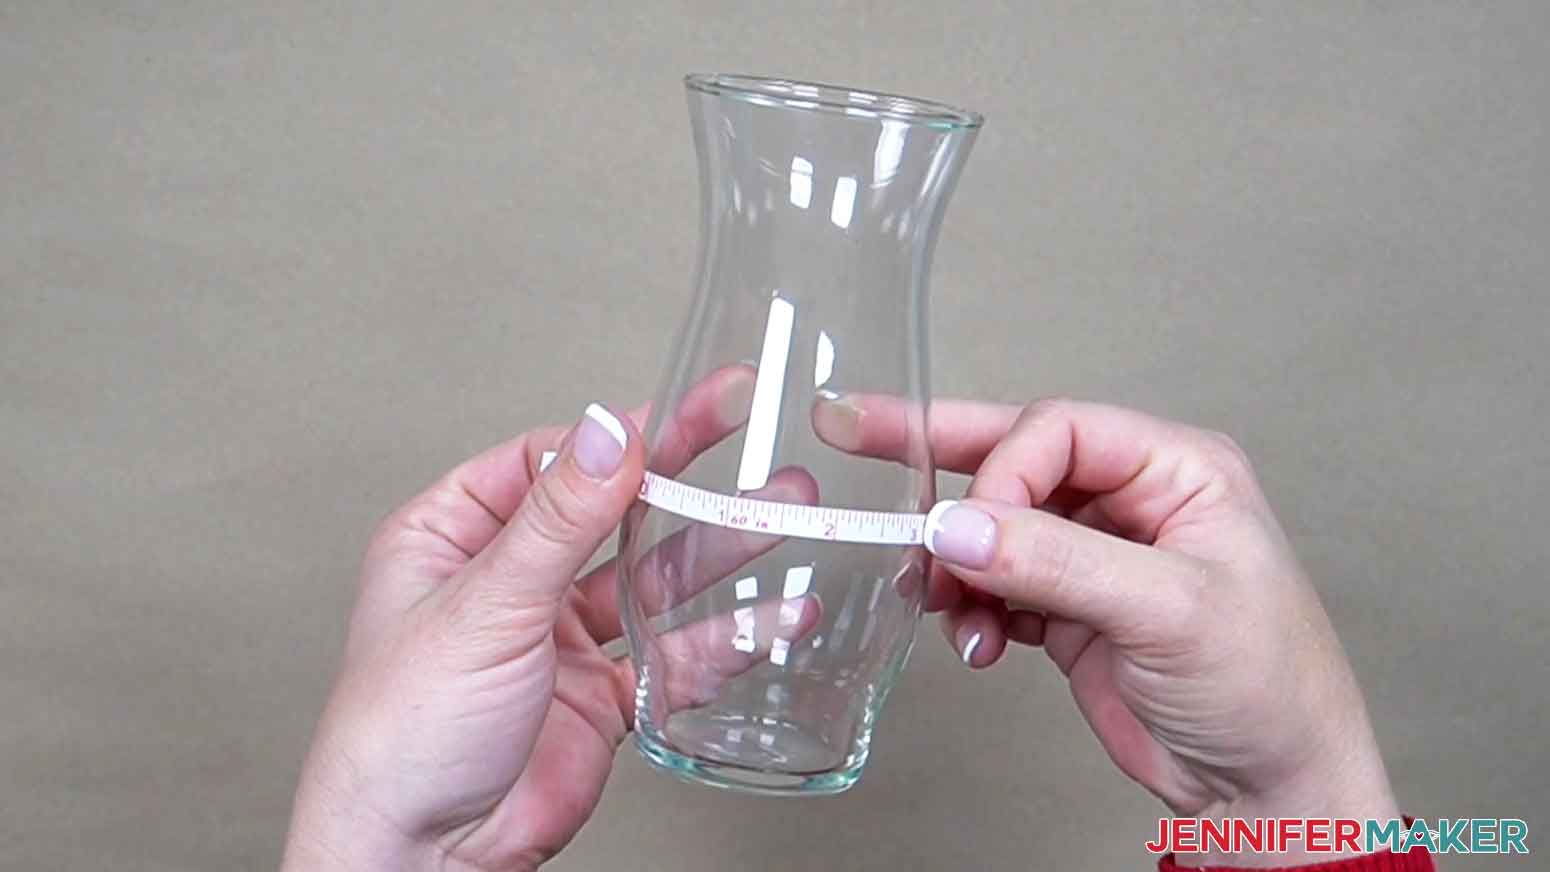 Use a tape measure to measure width of design area on glass vase.